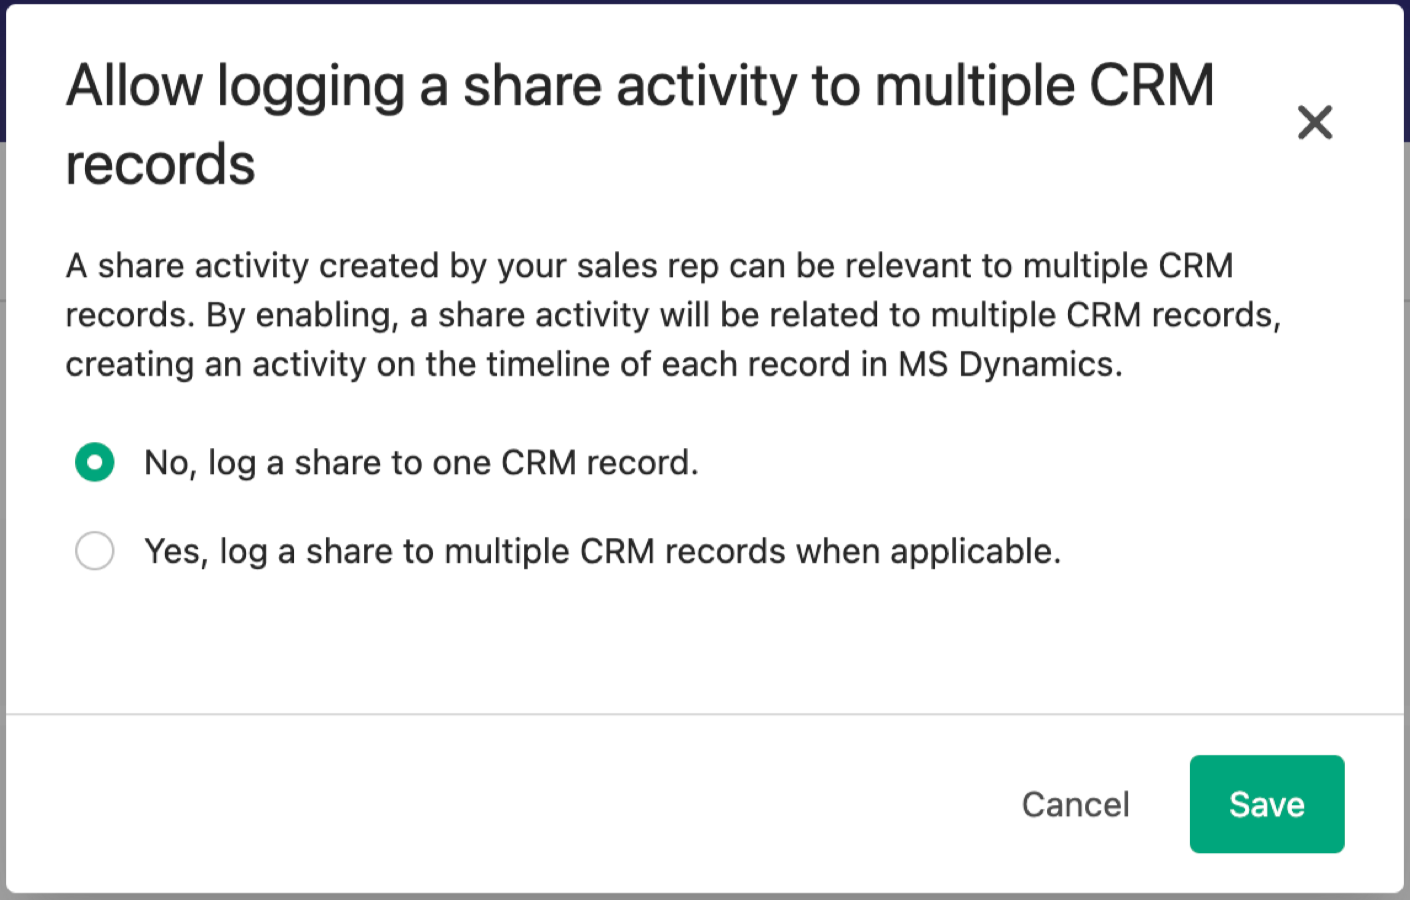 allow_logging_share_activity_to_multiple_CRM_records.png